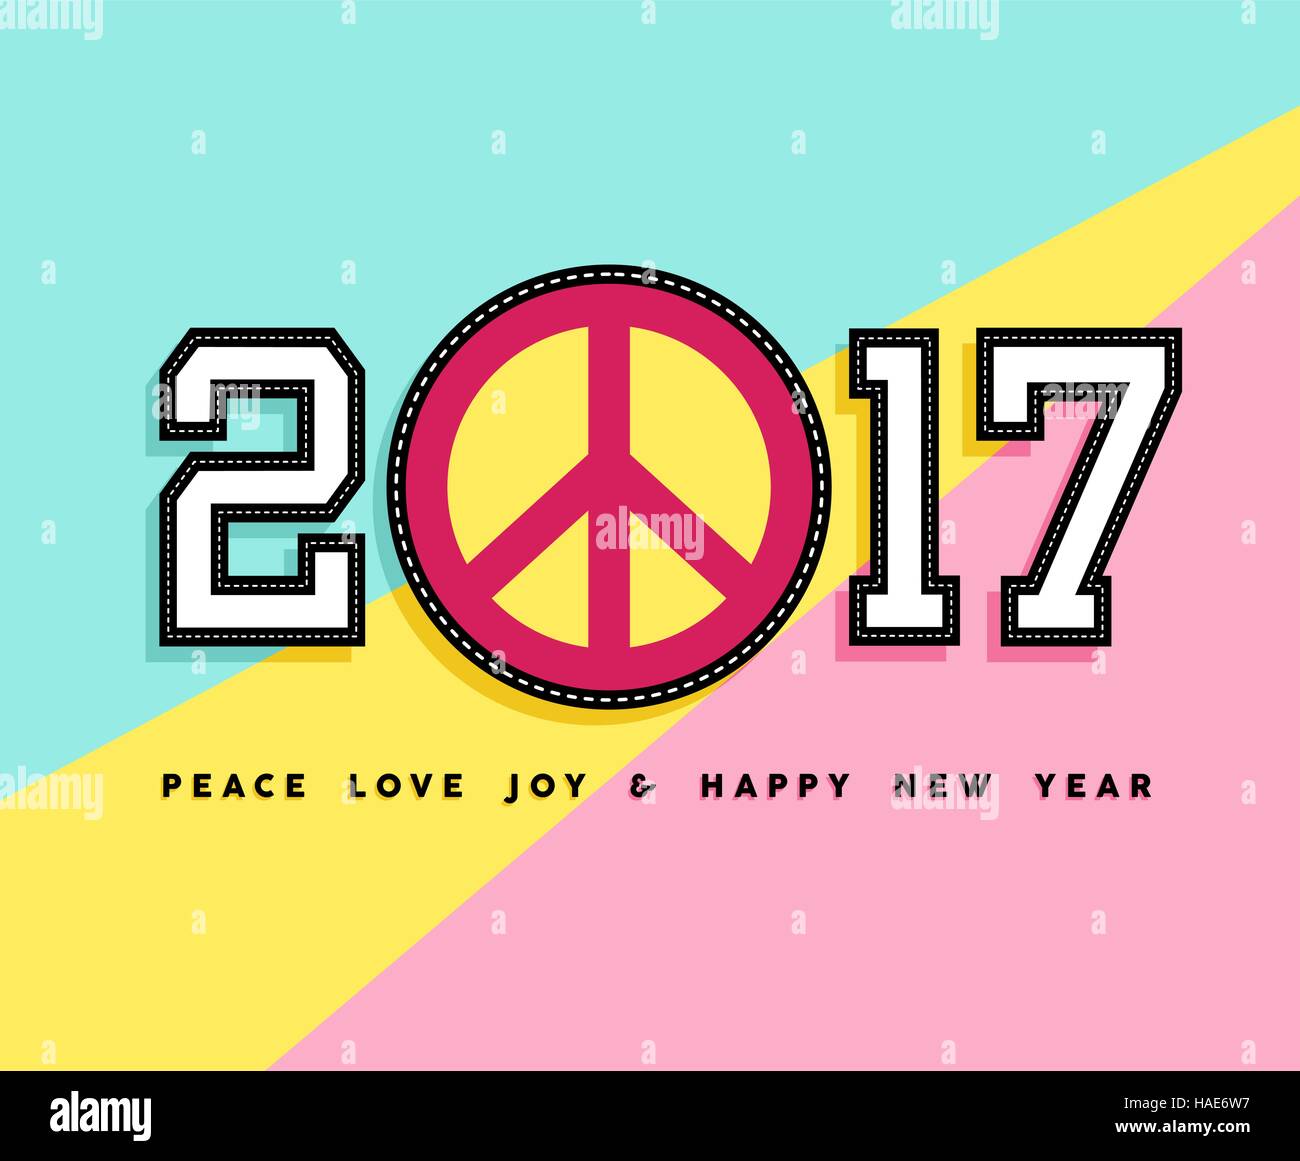 Happy New Year 2017 greeting card design with varsity college typography and stitch patch peace symbol icon as number. EPS10 vector. Stock Vector